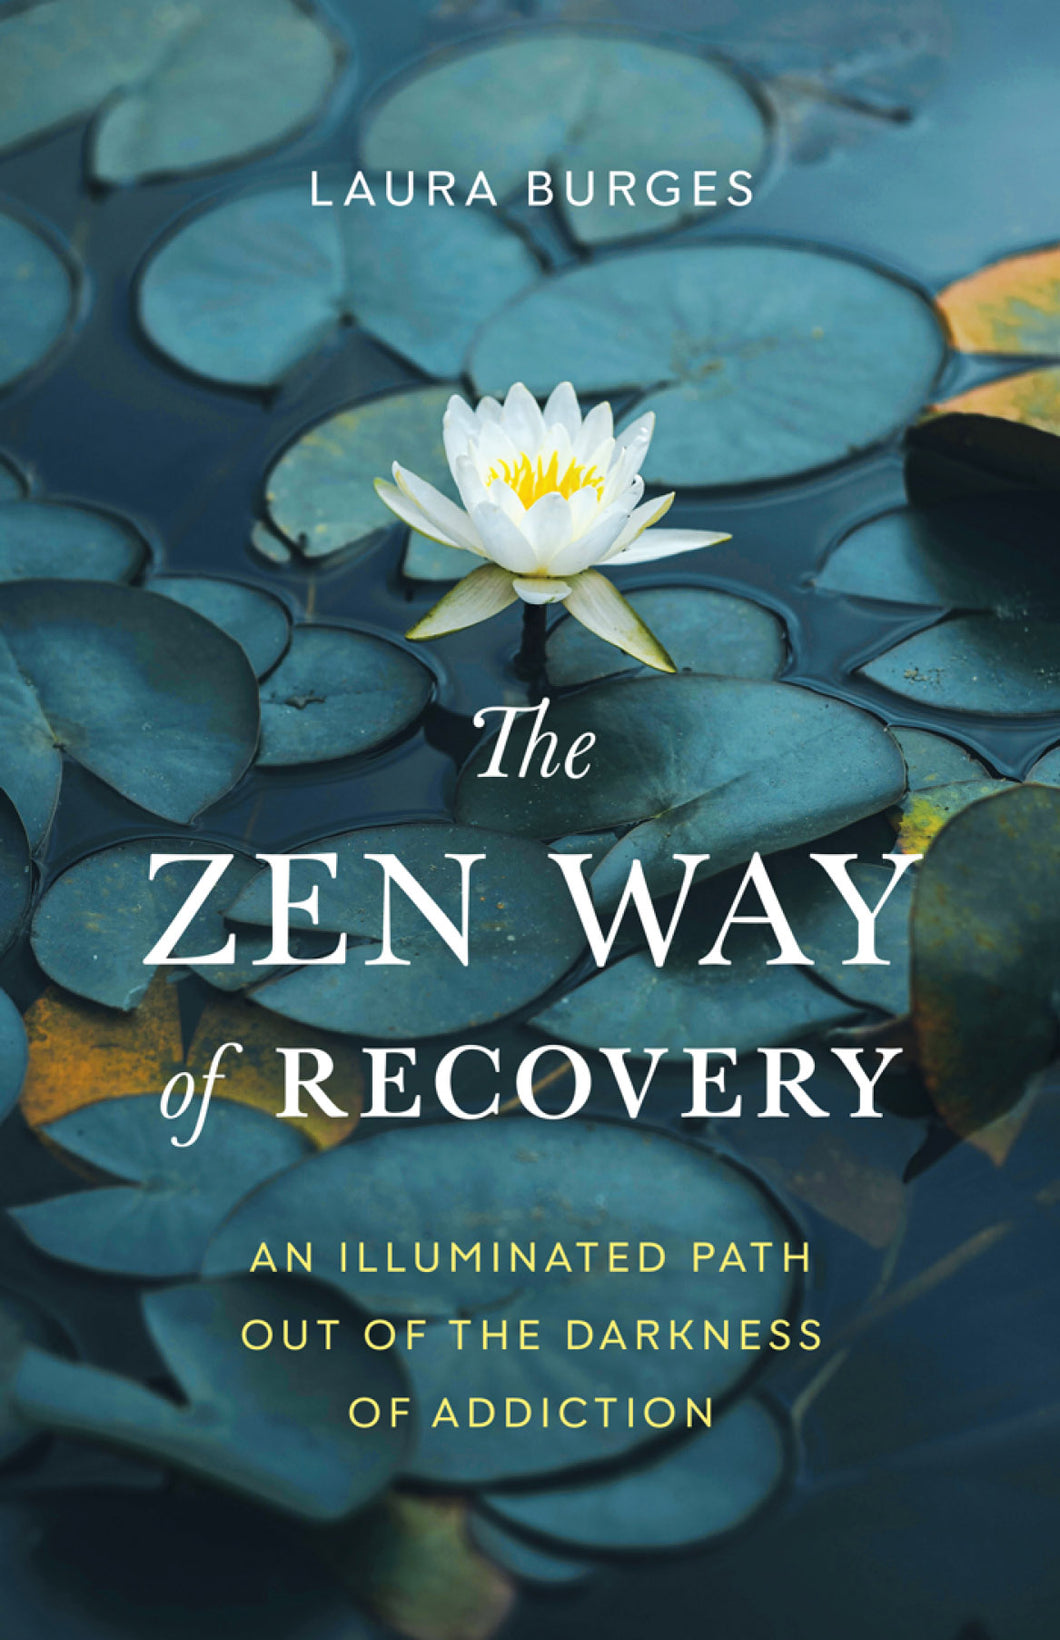 The Zen Way of Recovery